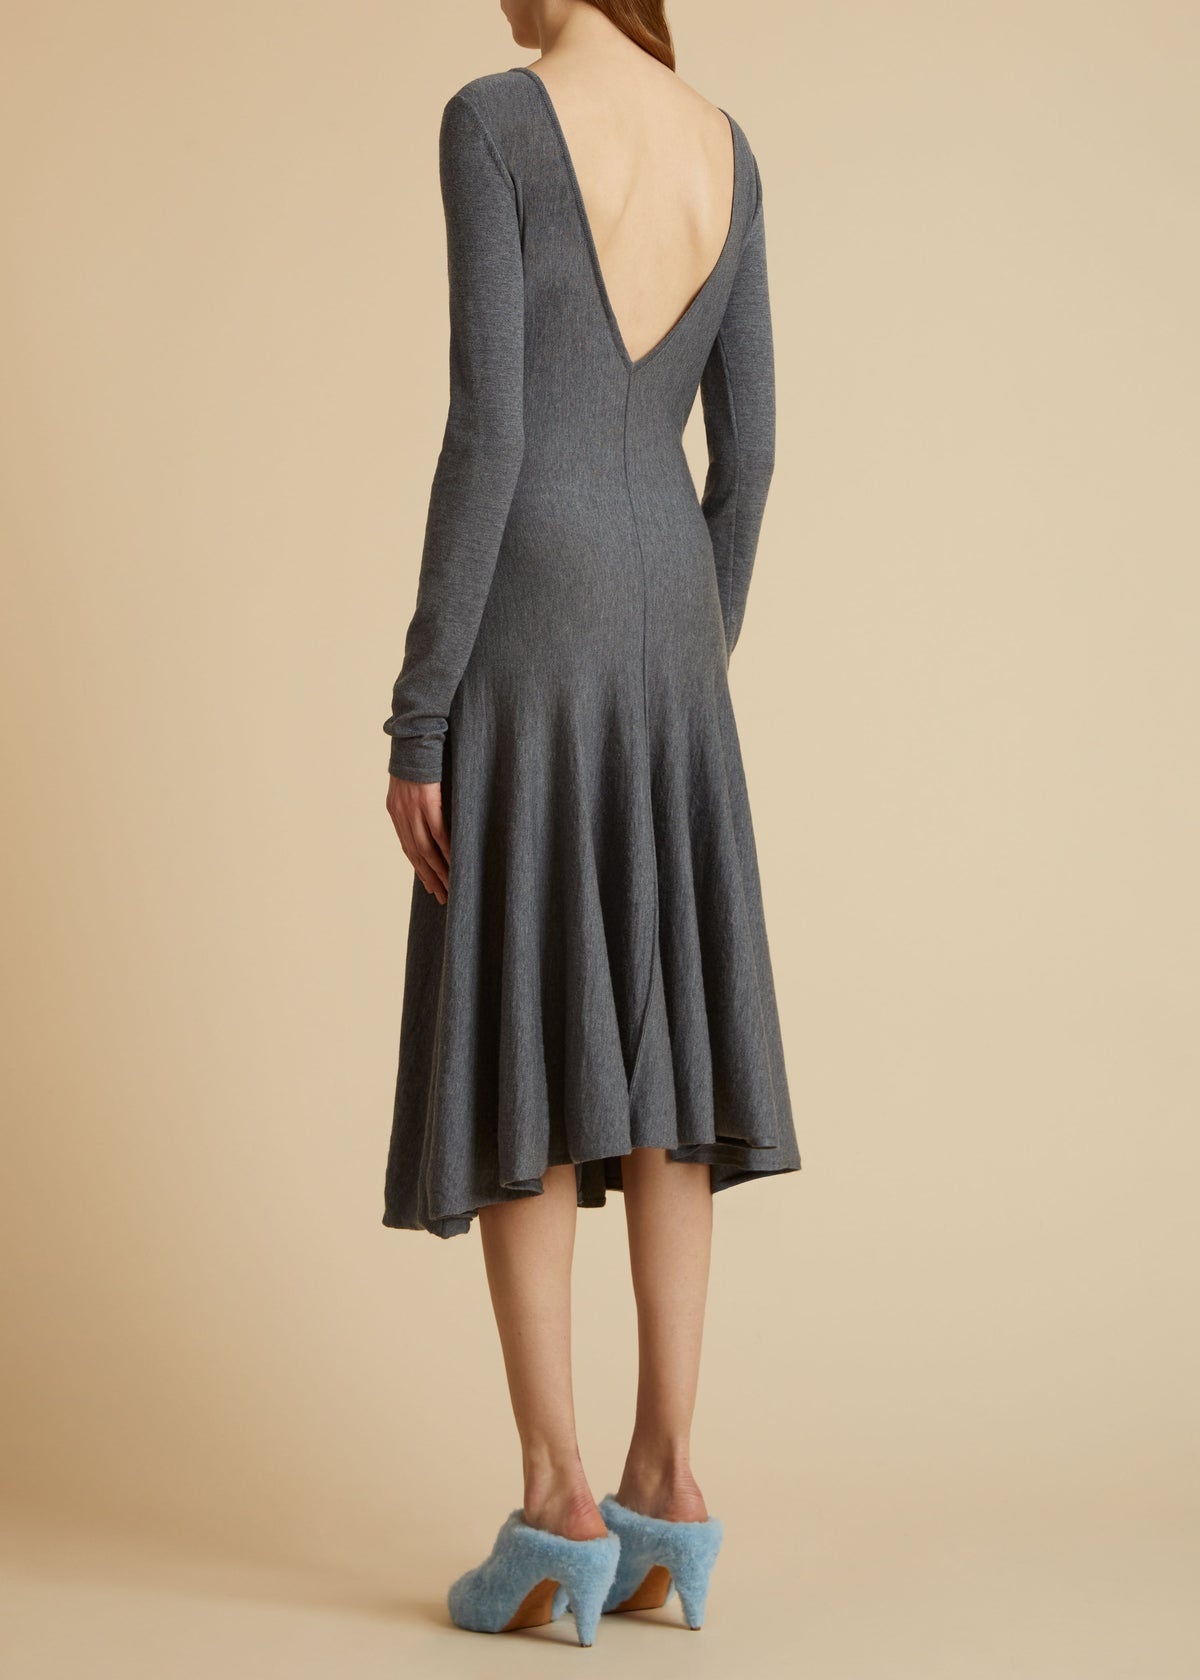 The Dany Dress in Sterling - 3